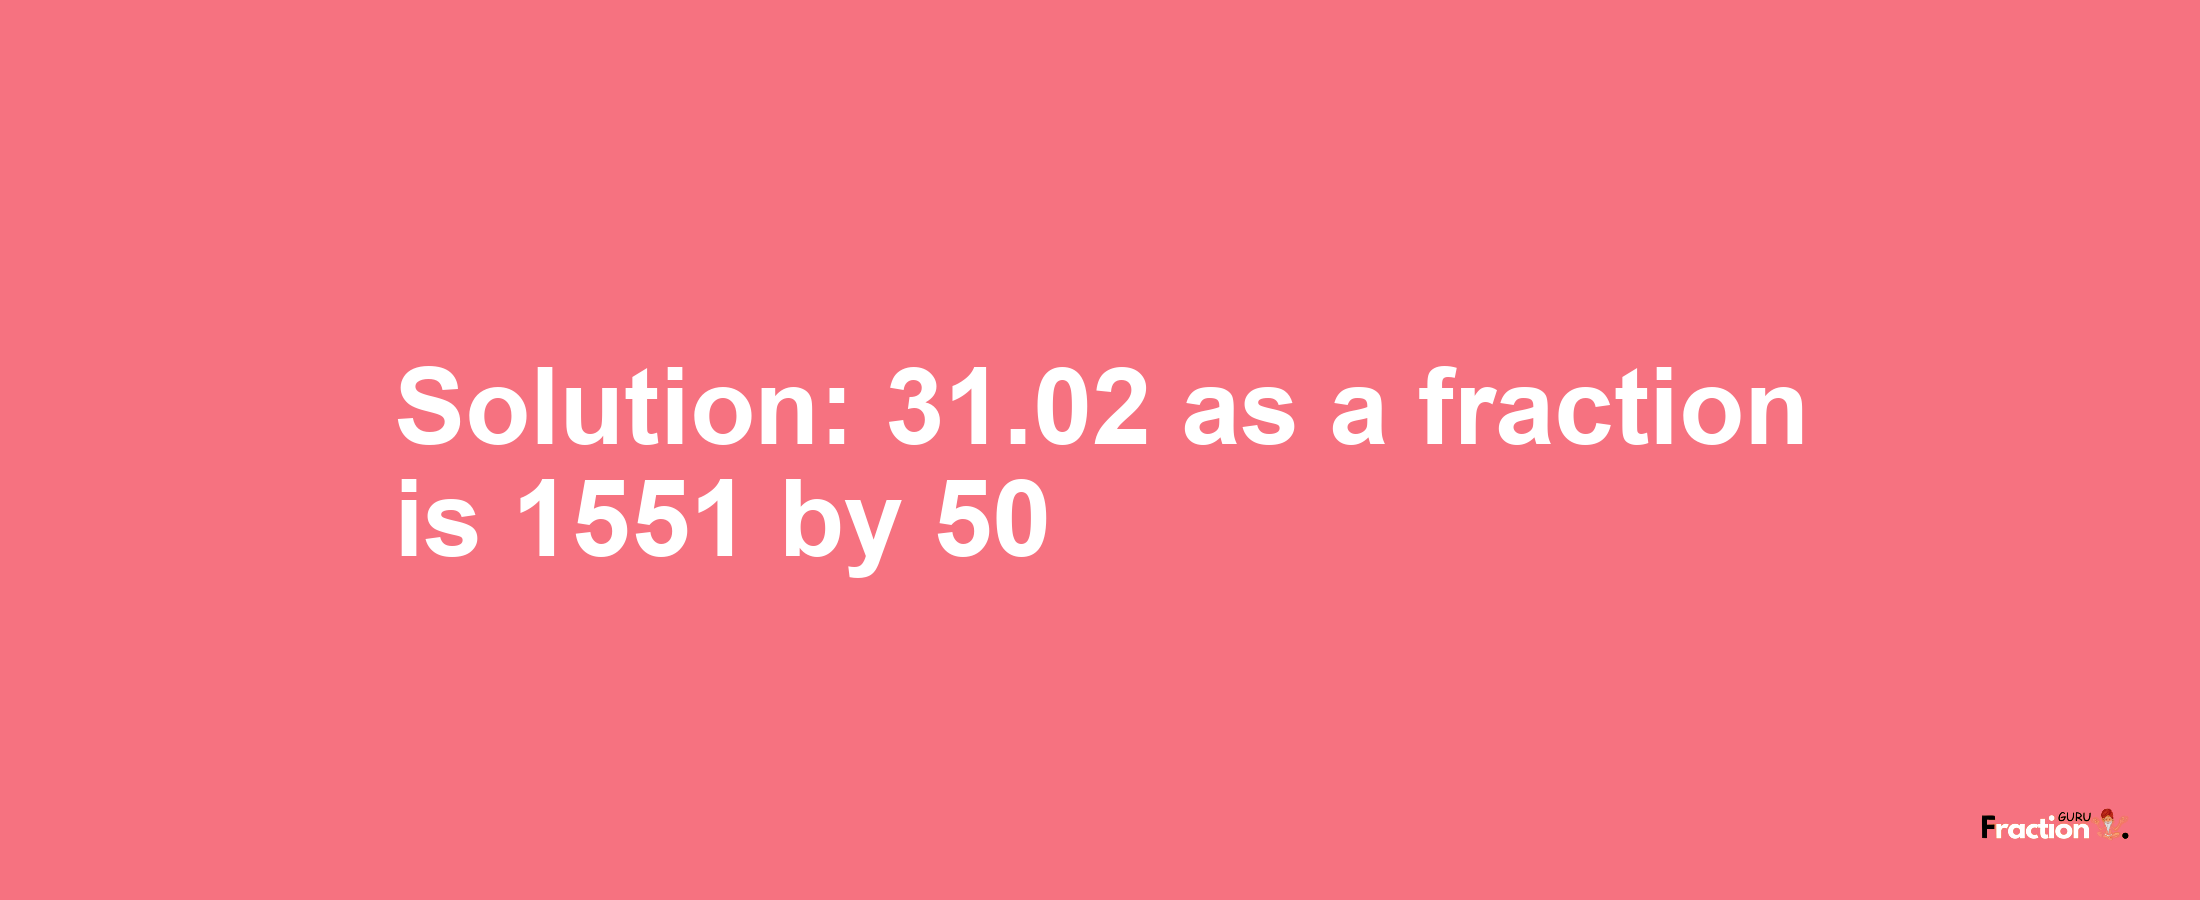 Solution:31.02 as a fraction is 1551/50